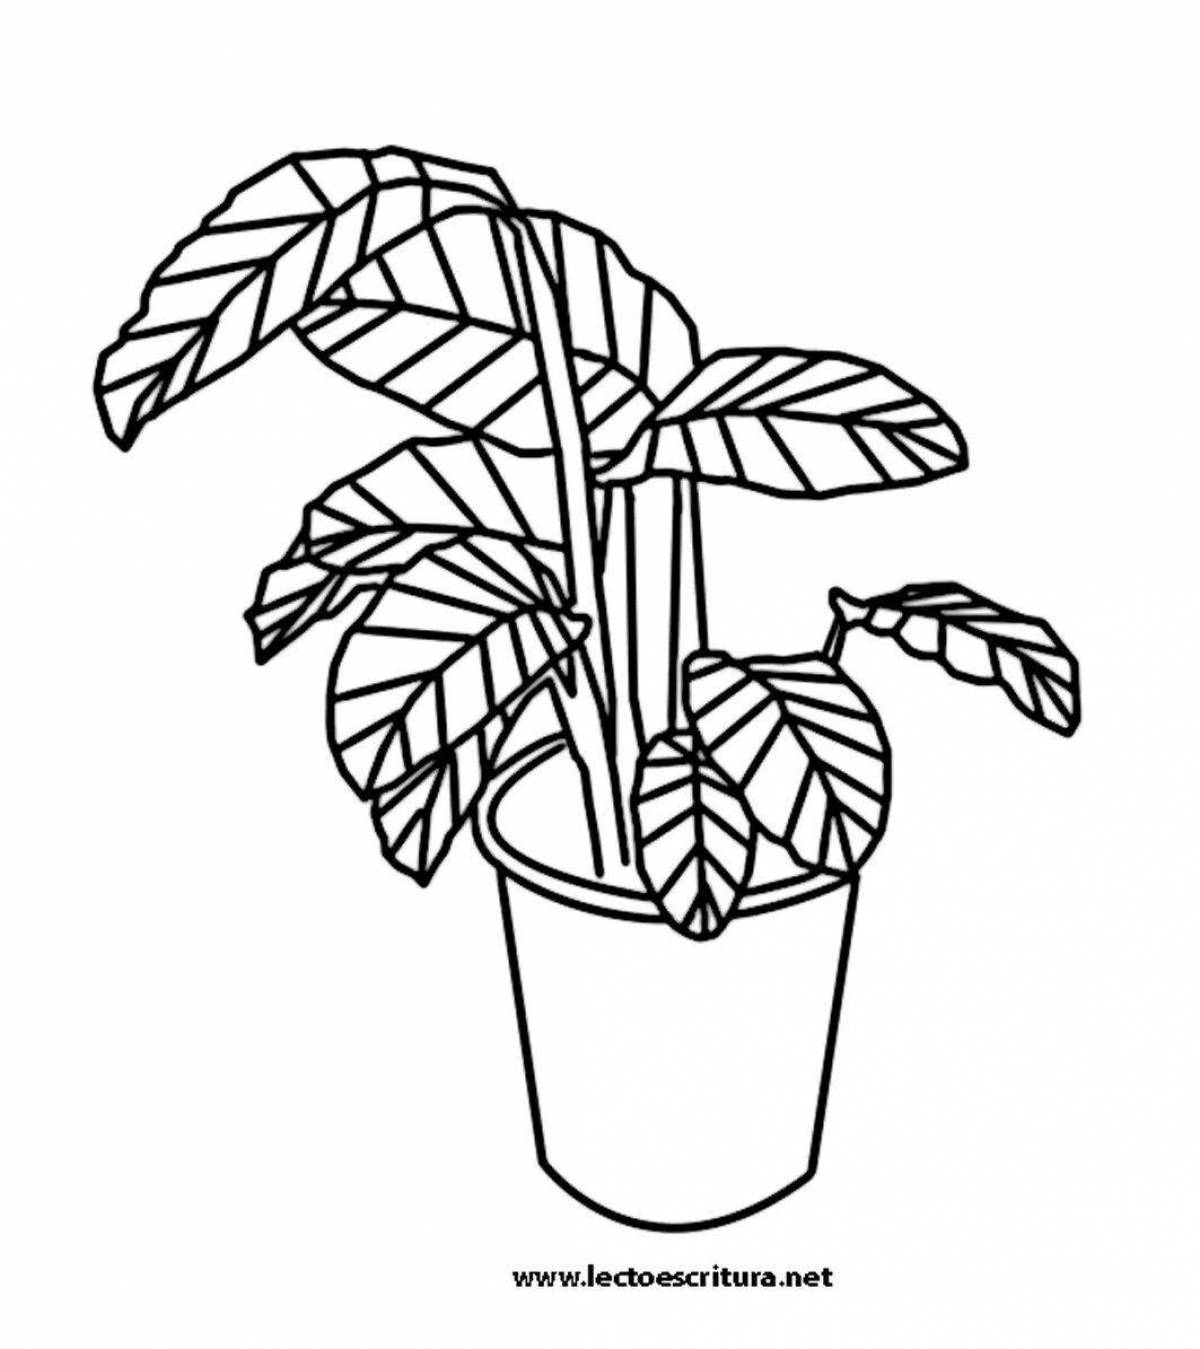 Colorful indoor flowers coloring pages for kids